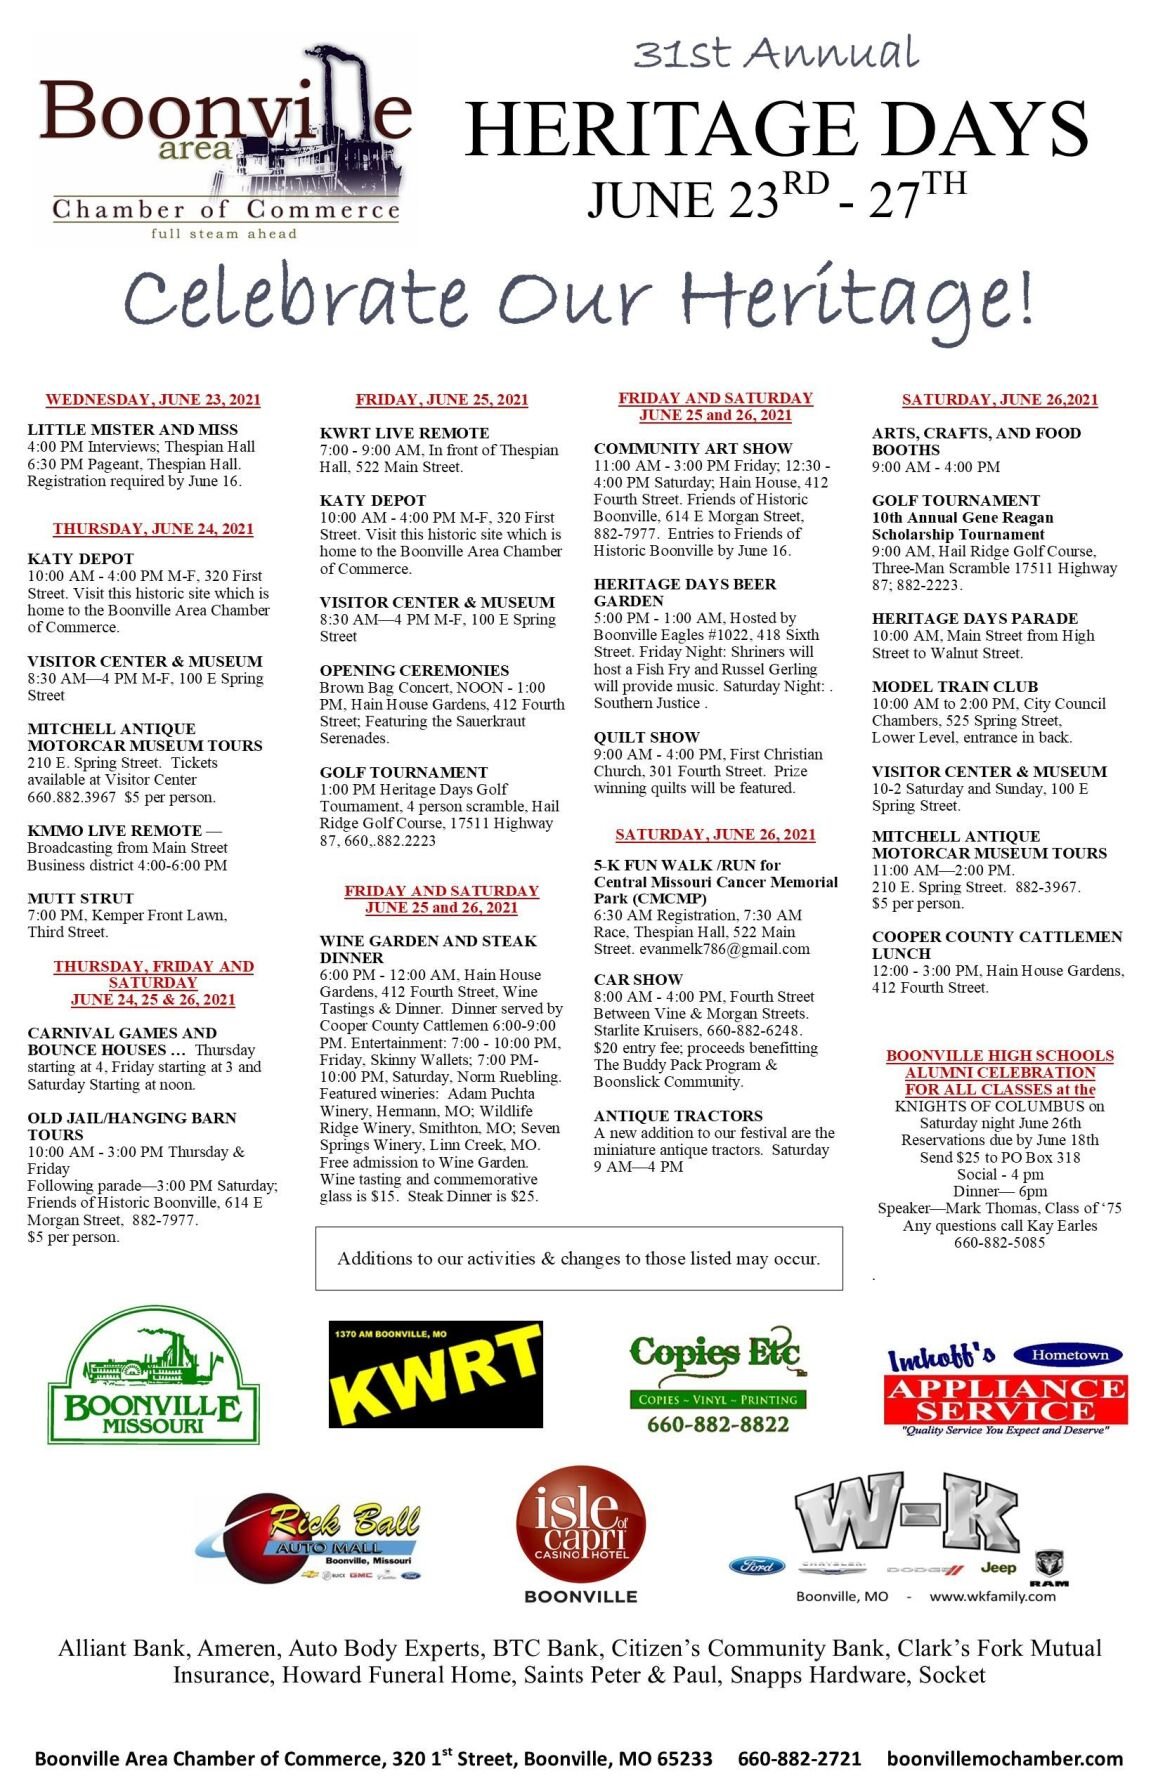 Boonville Heritage Days events